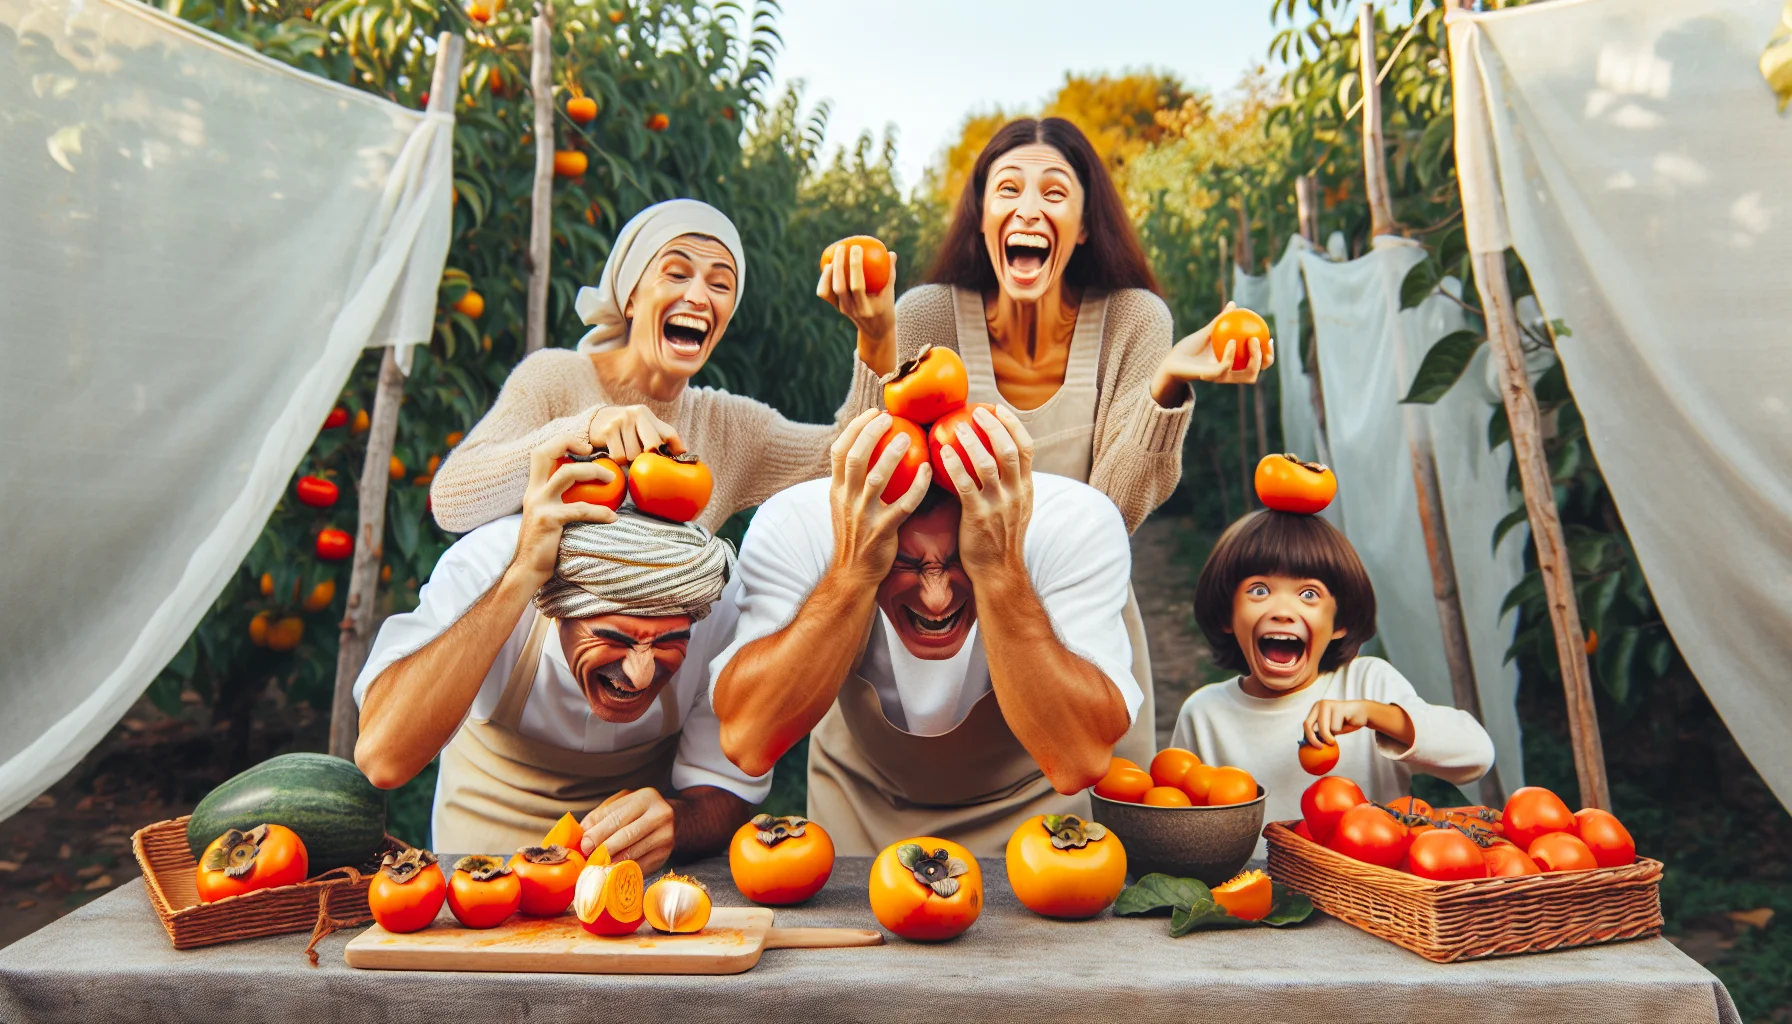 Craft an amusing and relatable scene in a garden setting in which various individuals are playfully learning to prepare and enjoy persimmons. There's a Middle-Eastern man trying to balance ripe persimmons on his head, a White woman laughing hysterically as she mistakenly peels a tomato instead of a persimmon, and a Black child watching in amusement with a fresh persimmon in his hand, ready to savor. Highlight the richness of the persimmons' orange color against the green backdrop of the garden and ensure that this scene inspires a love for gardening and fresh produce.